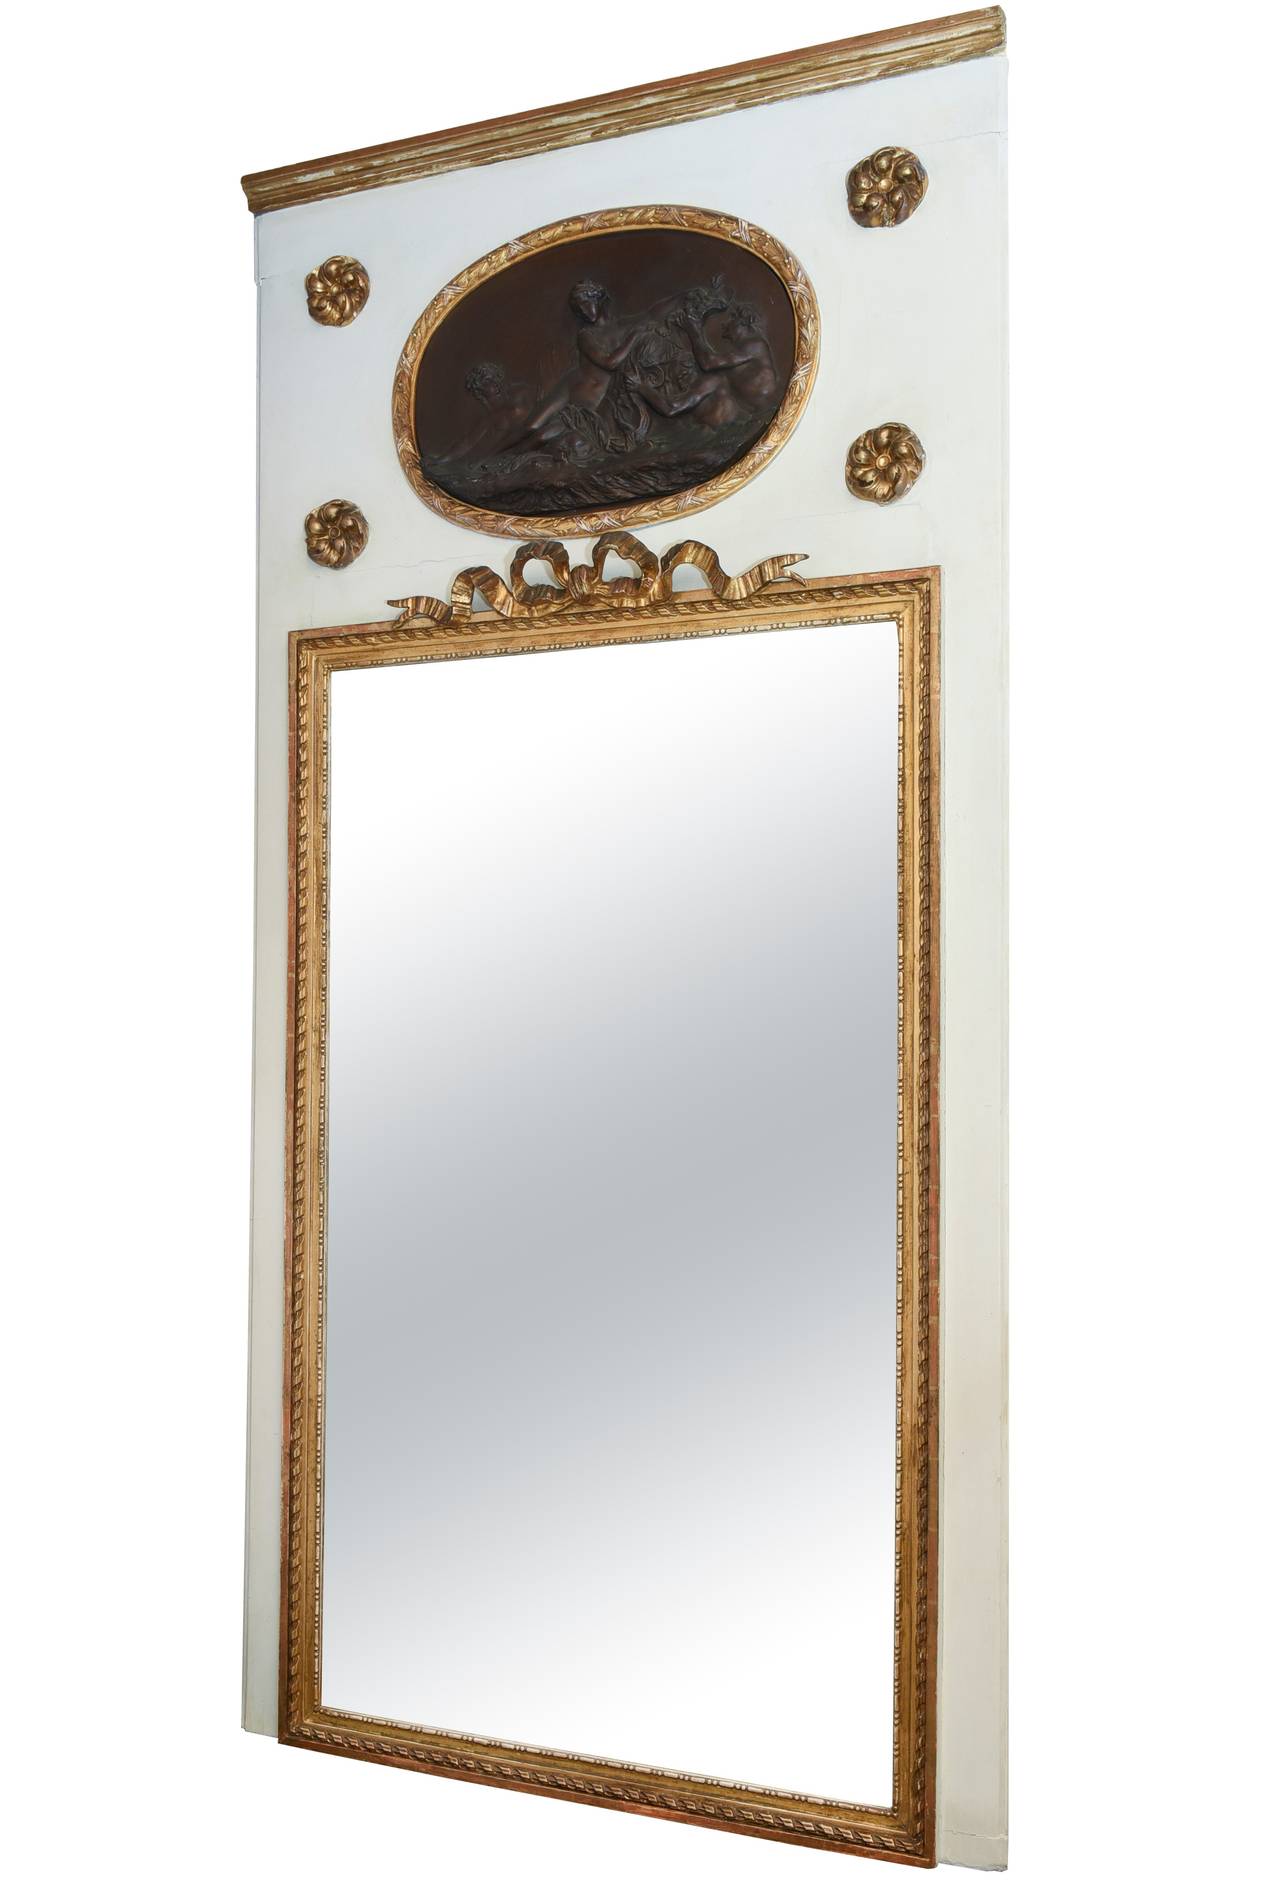 19th Century Monumental Trumeau Mirror, Inset with Plaque after Clodion